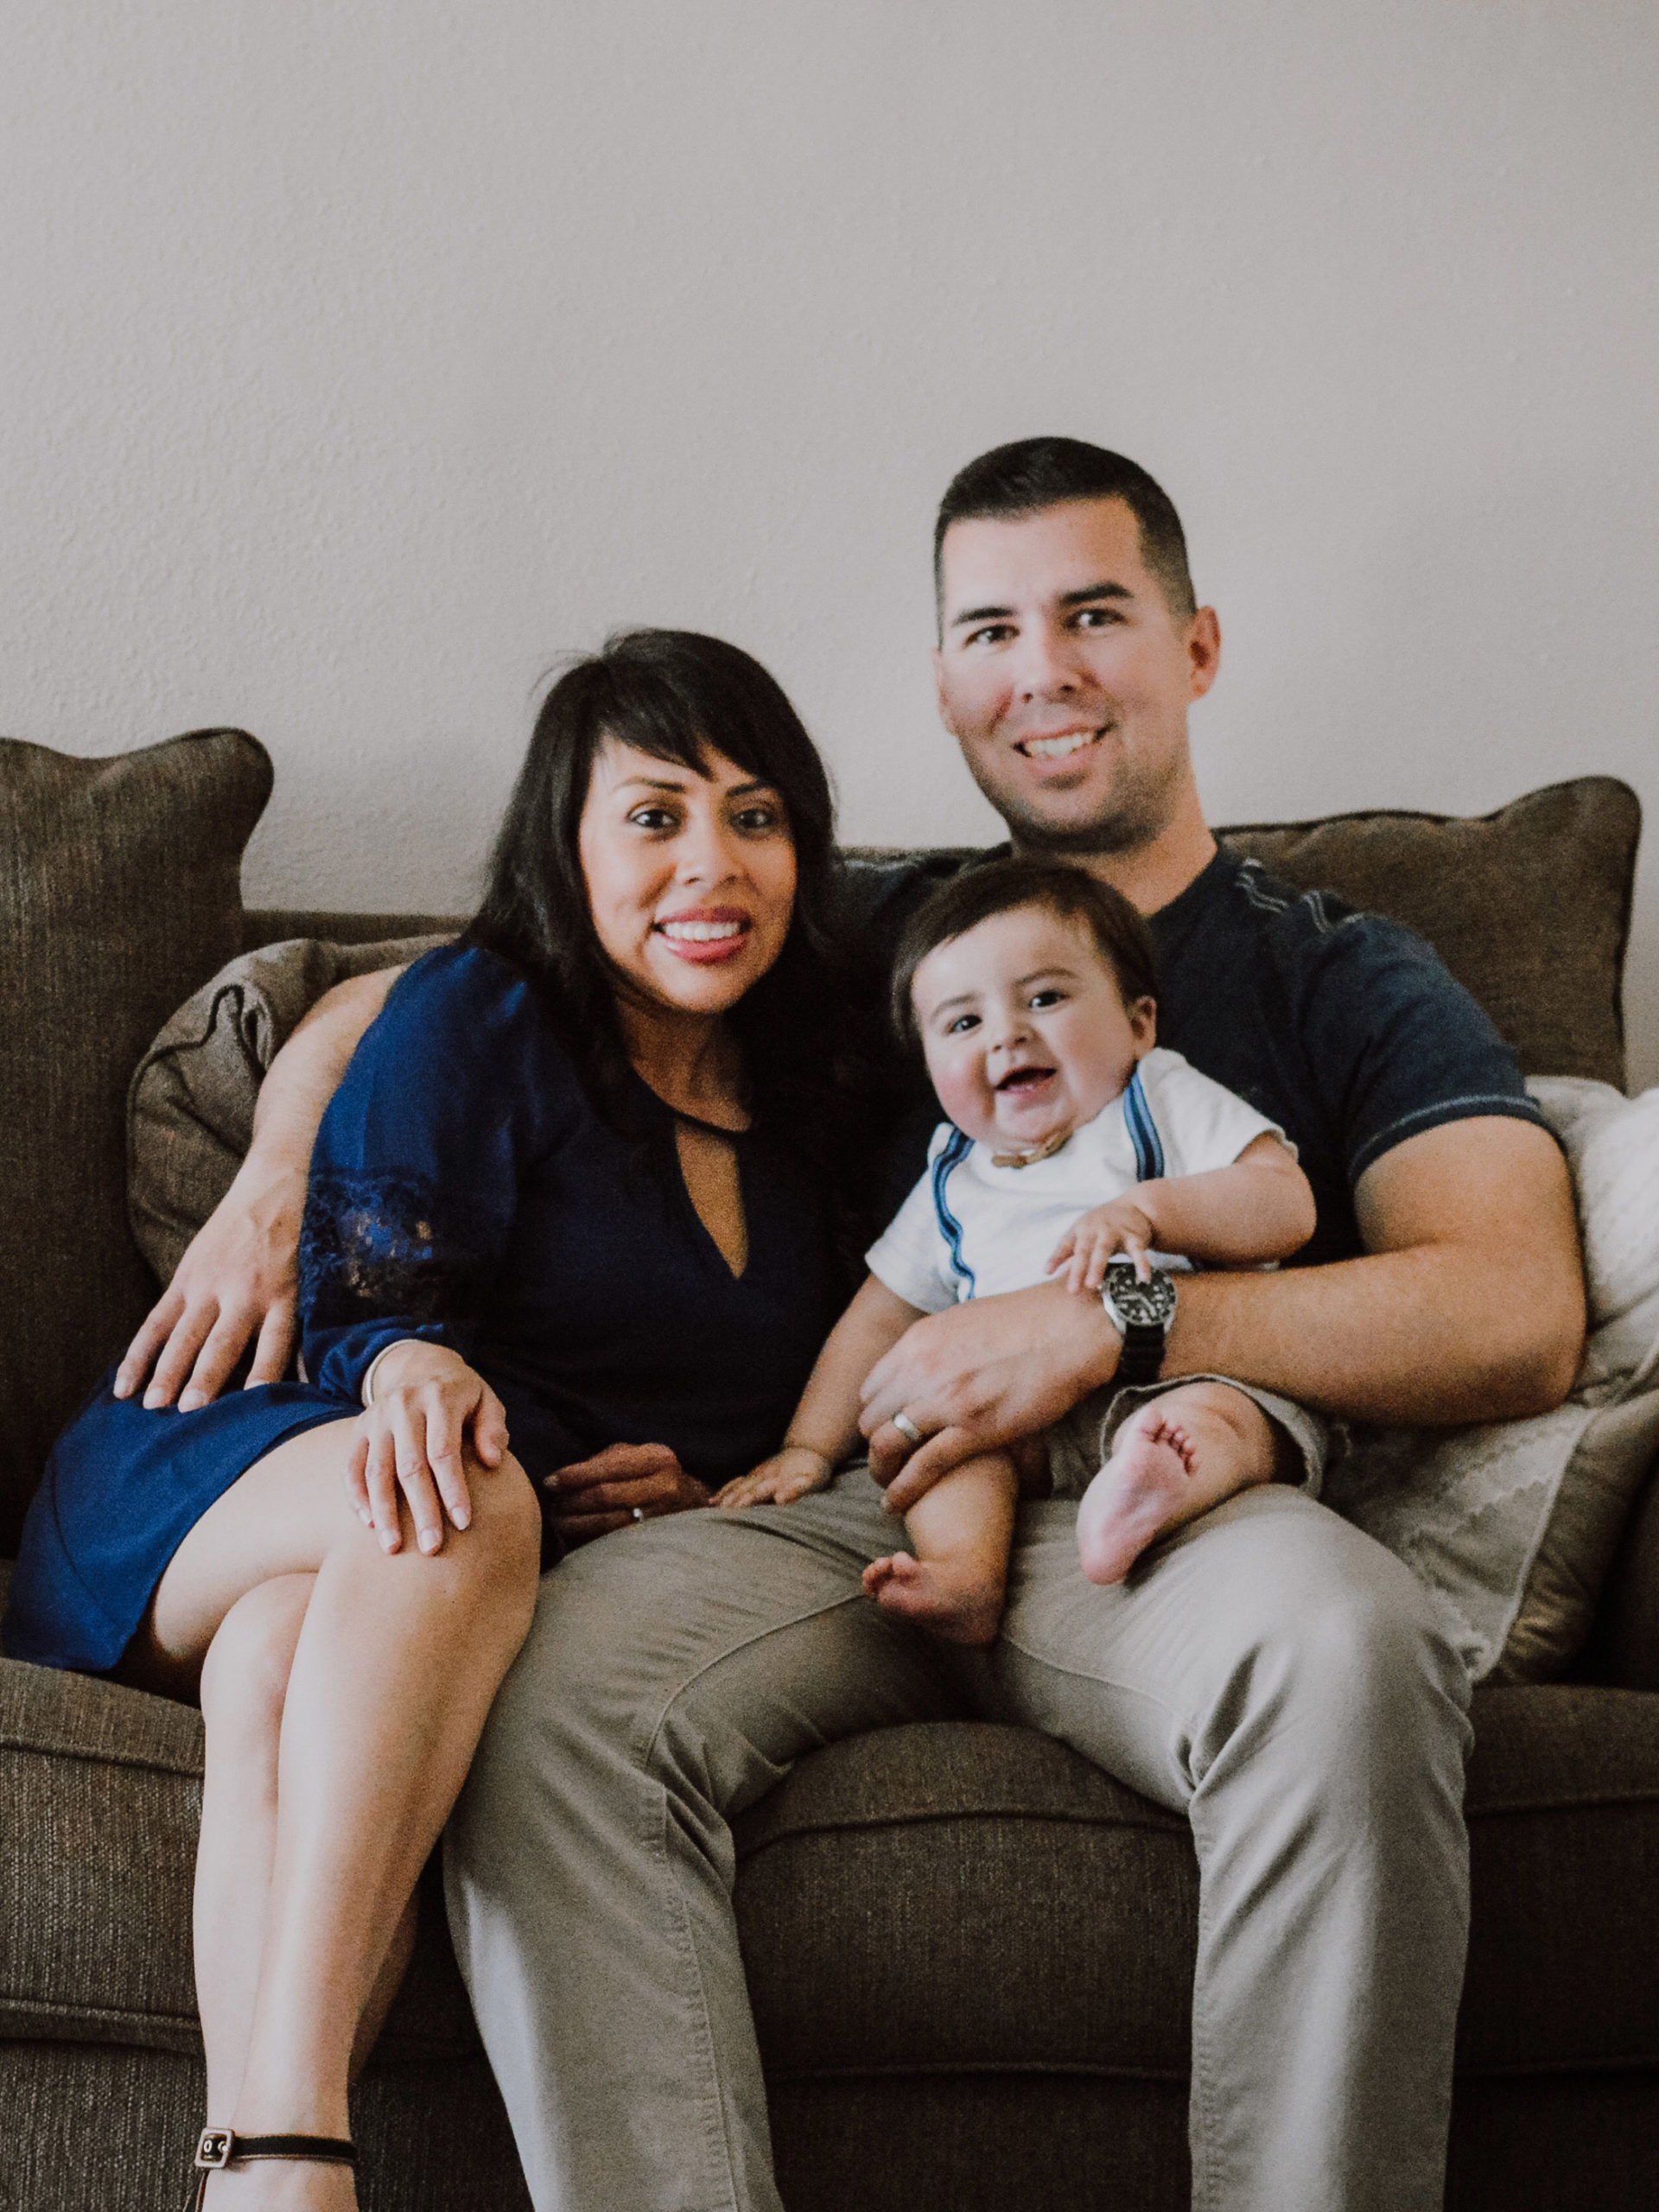 Lizette and her husband Sean posing in a family photo with their son Landon